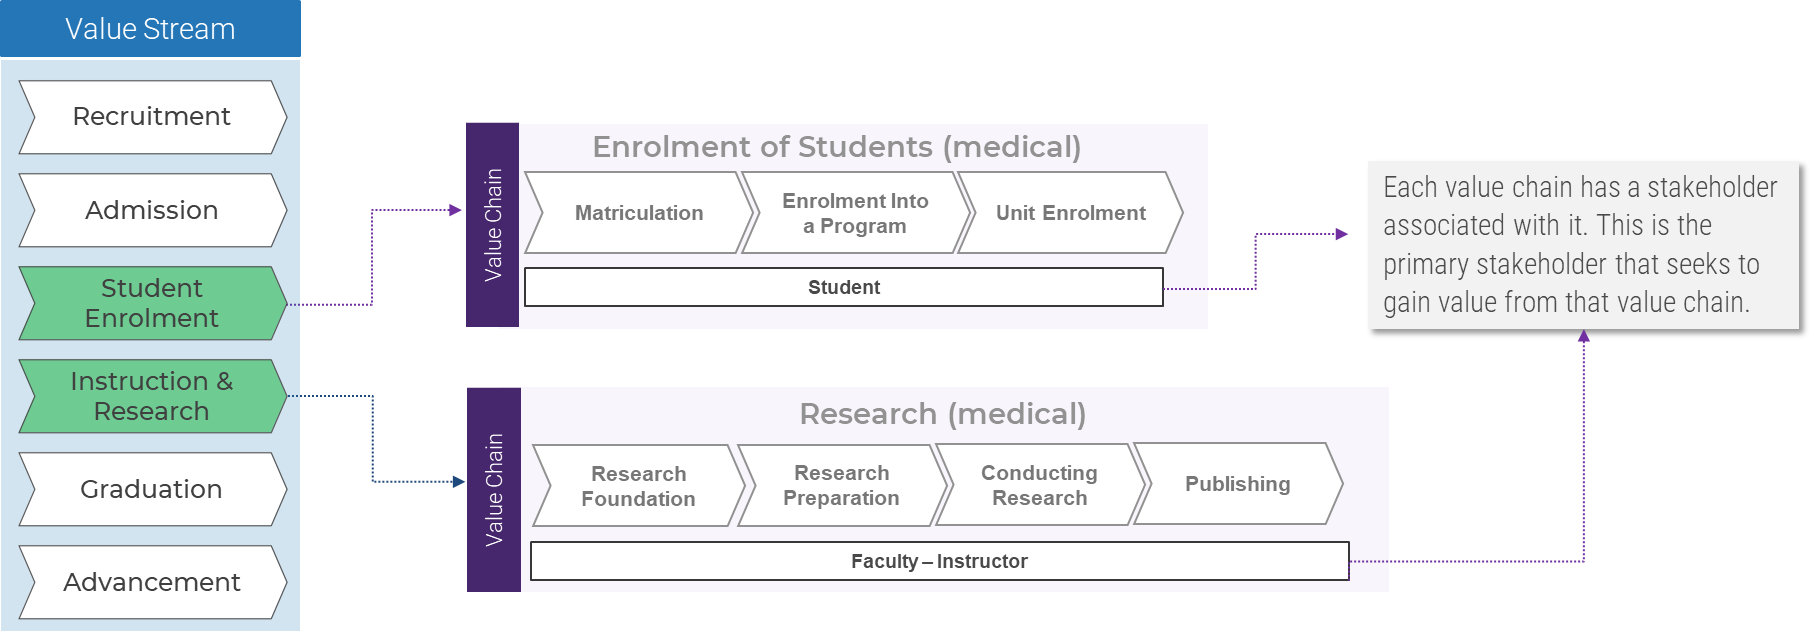 this image depicts two sample value chains for the value streams: student enrolment and Instruction & Research. Each value chain has a stakeholder associated with it. This is the primary stakeholder that seeks to gain value from that value chain. 